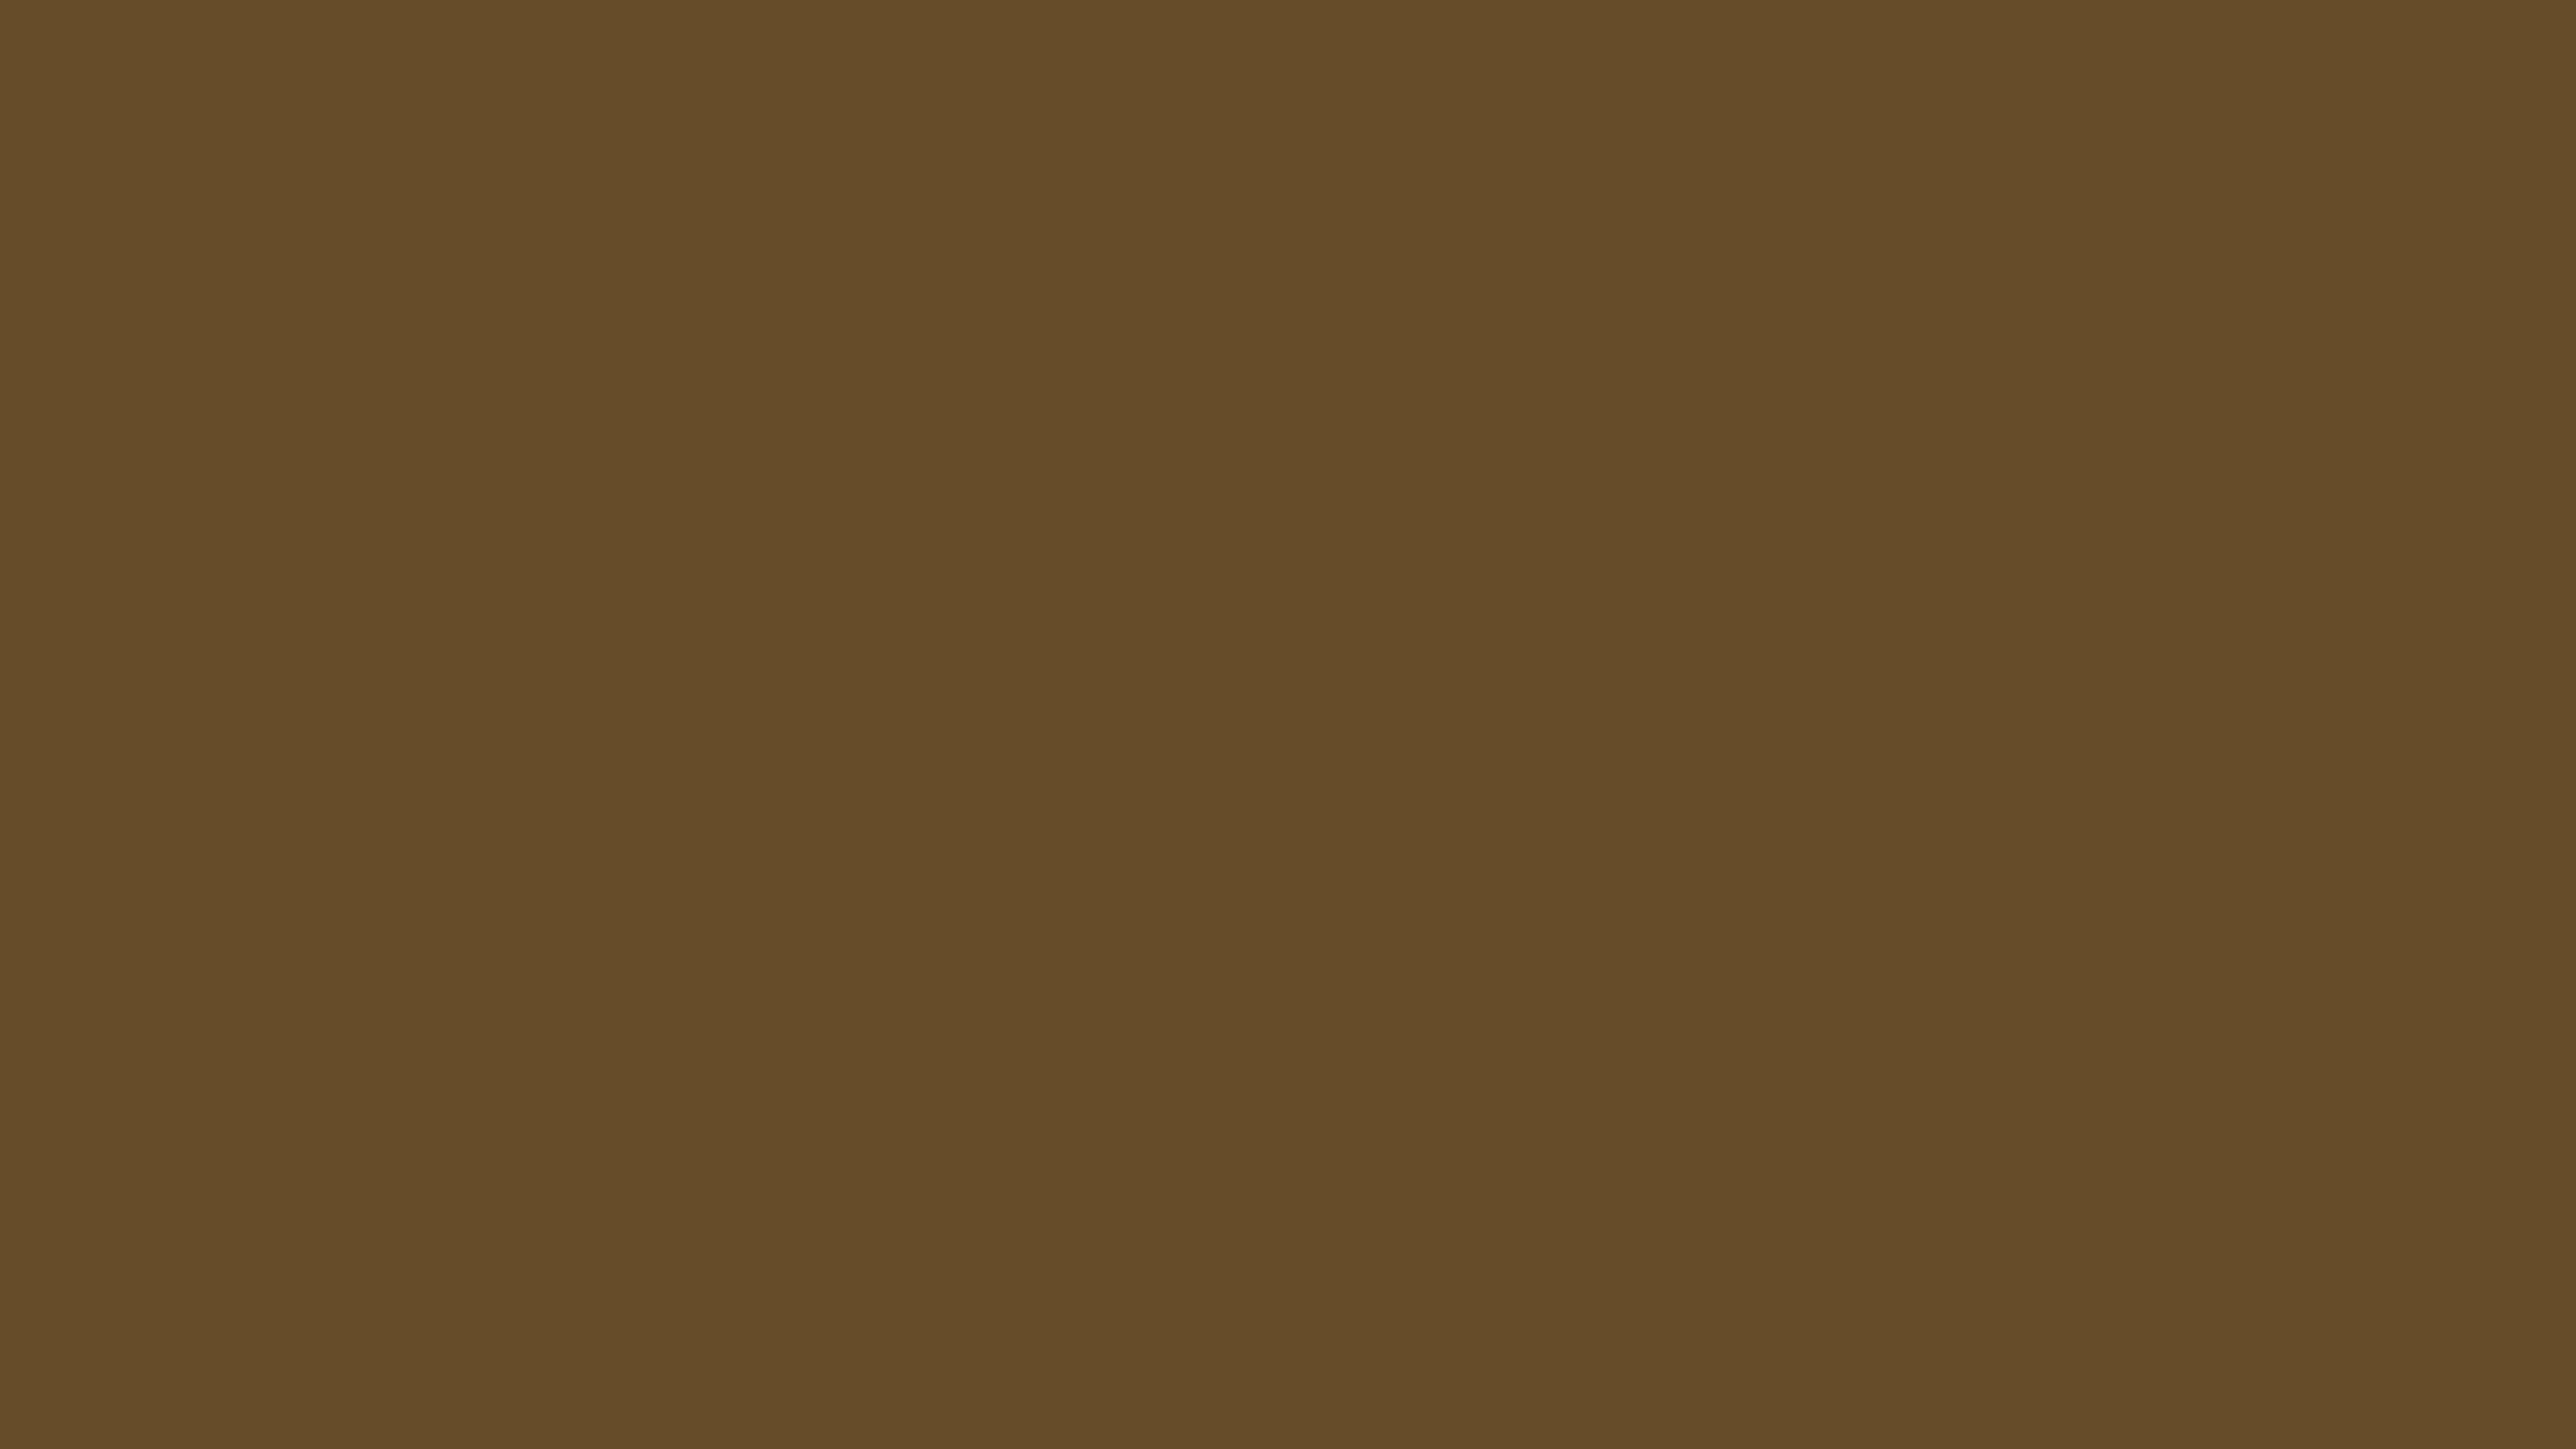 7680x4320 Donkey Brown Solid Color Background